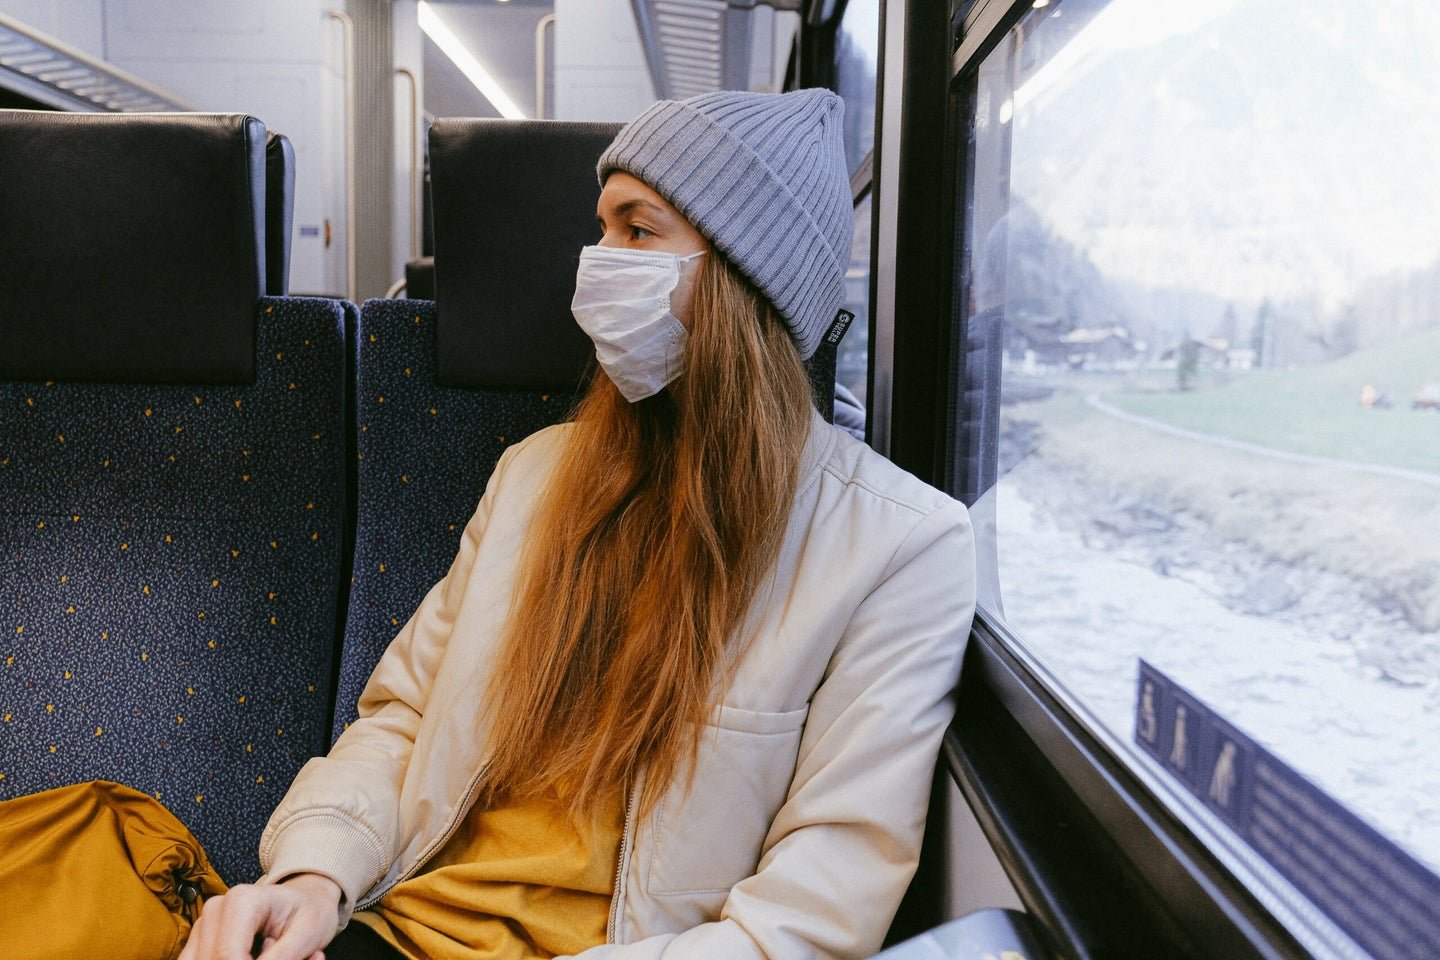 Wearing a mask could protect you from COVID-19 in more ways than you think